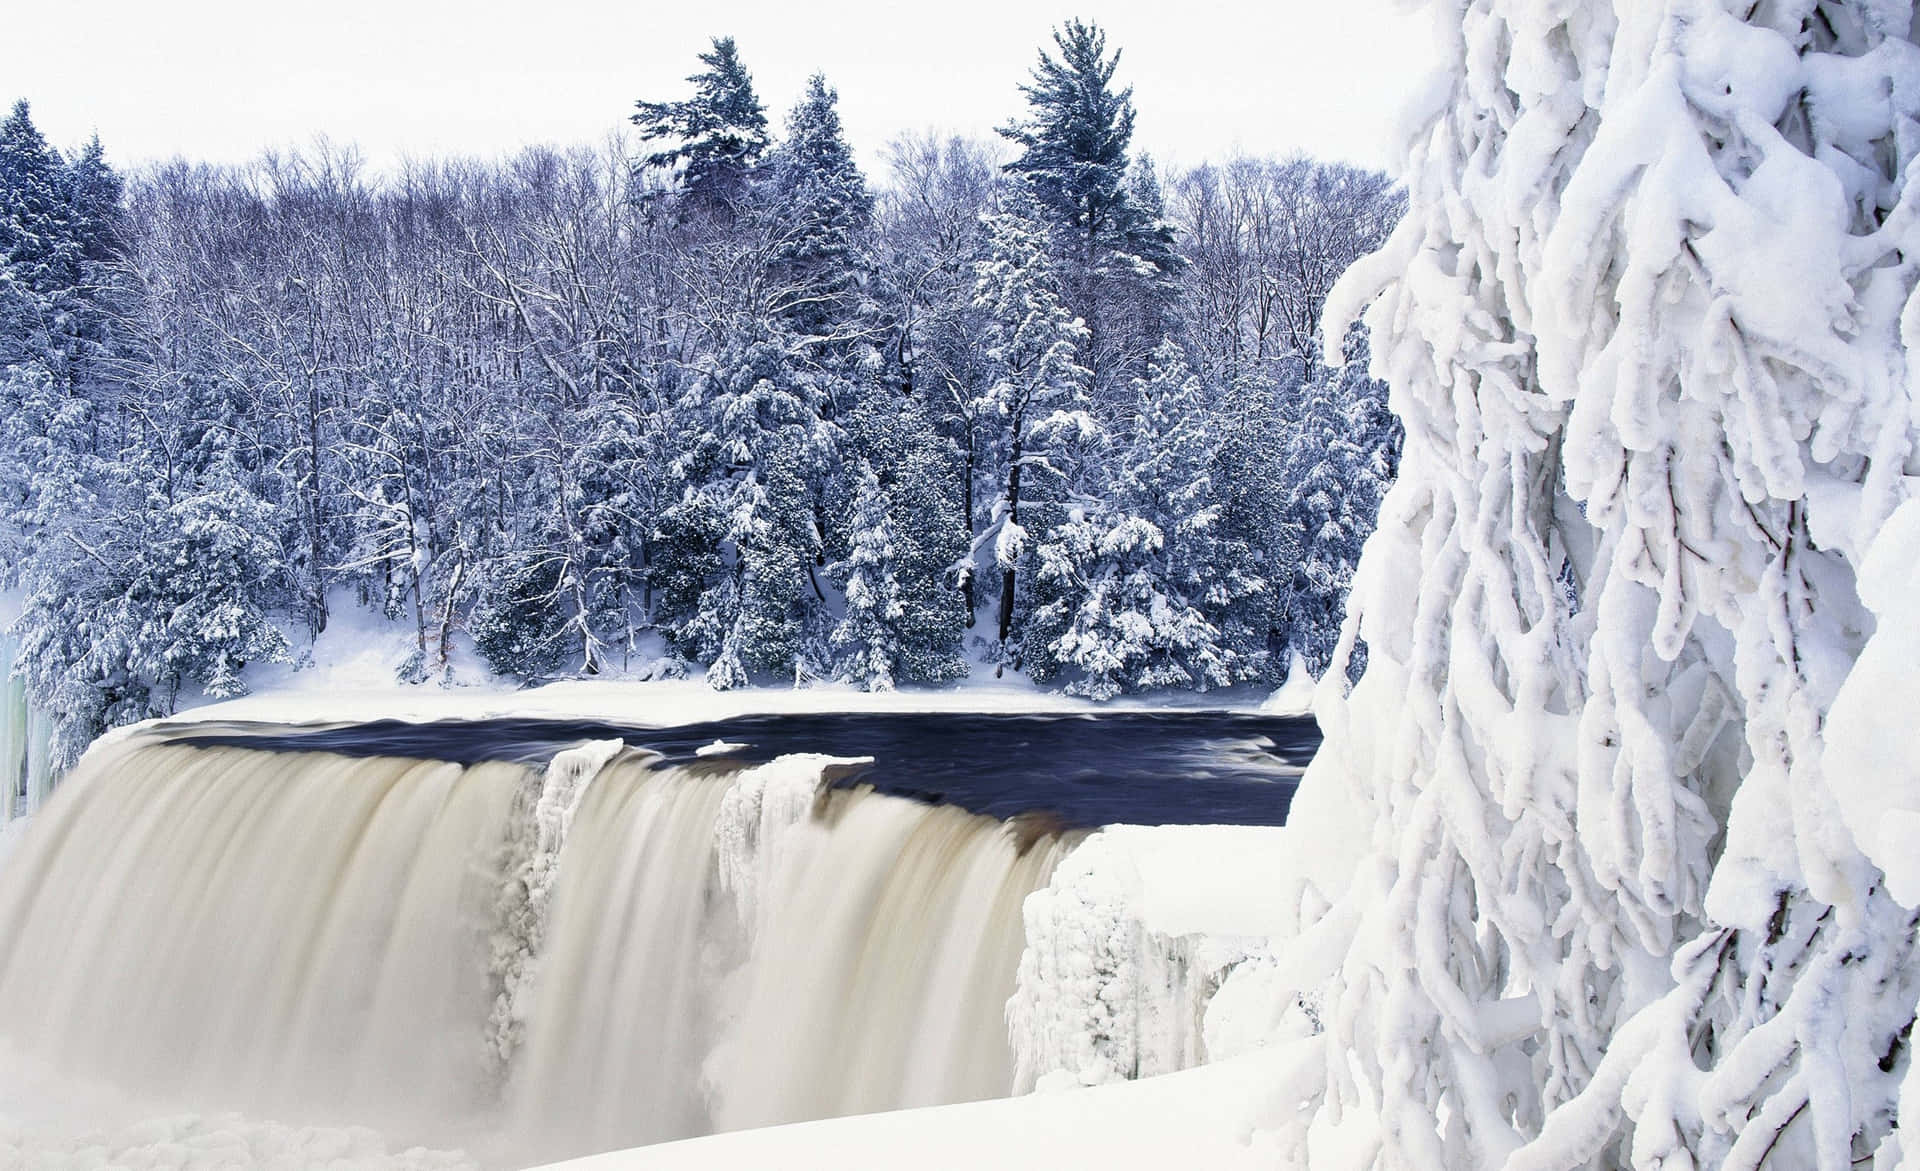 Experience the winter scenery of nature straight from your desktop Wallpaper